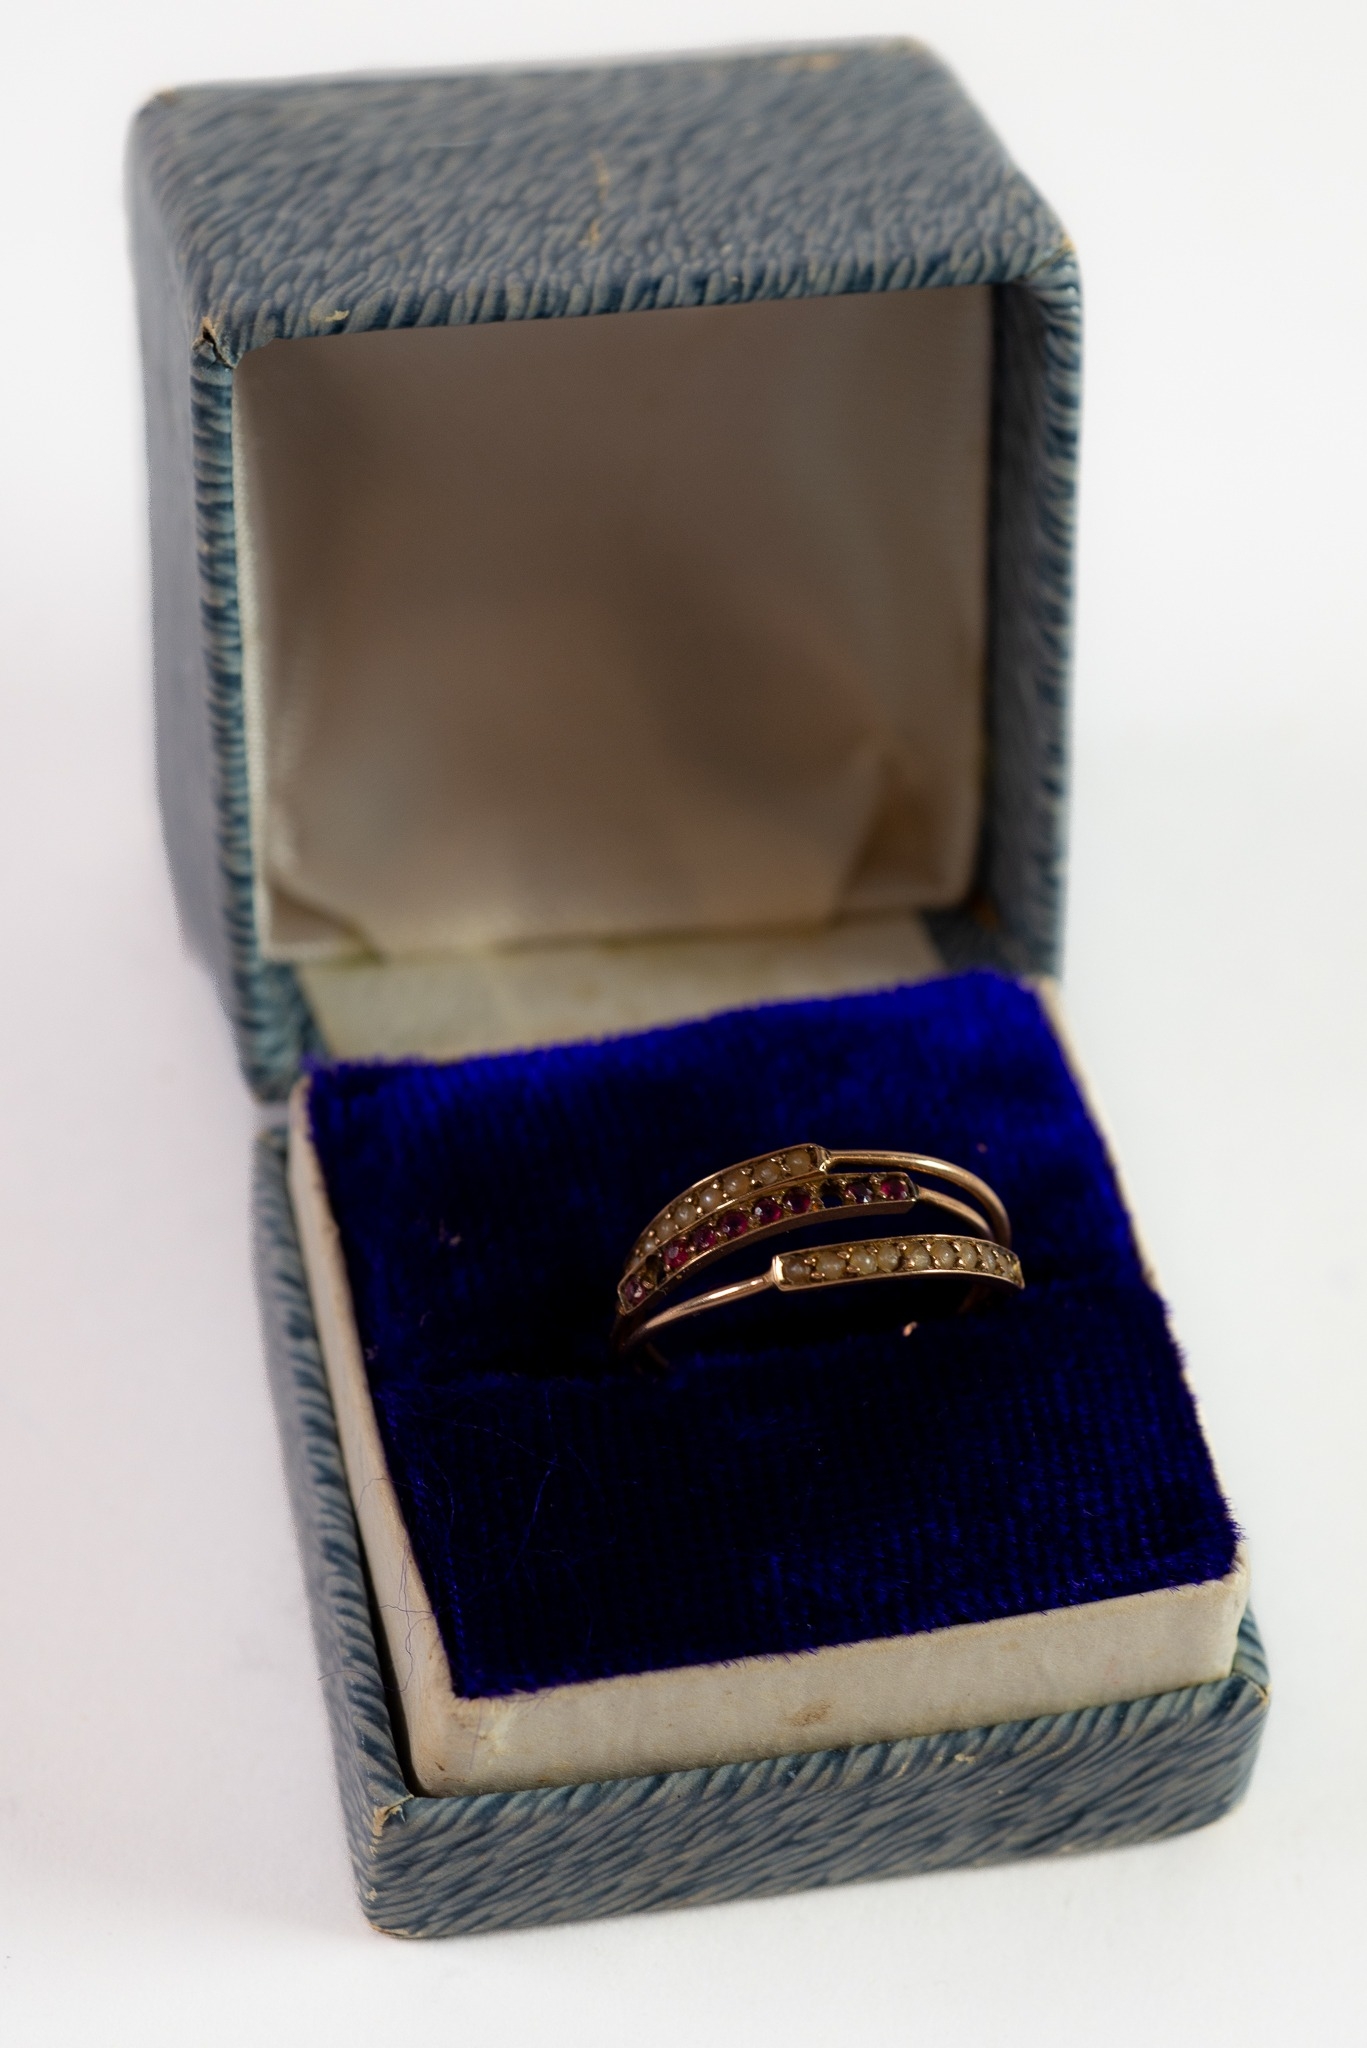 9ct GOLD TINY GREEN AND WHITE STONE SET ETERNITY RING, another unmarked GOLD COLOUR METAL TINY WHITE - Image 5 of 6